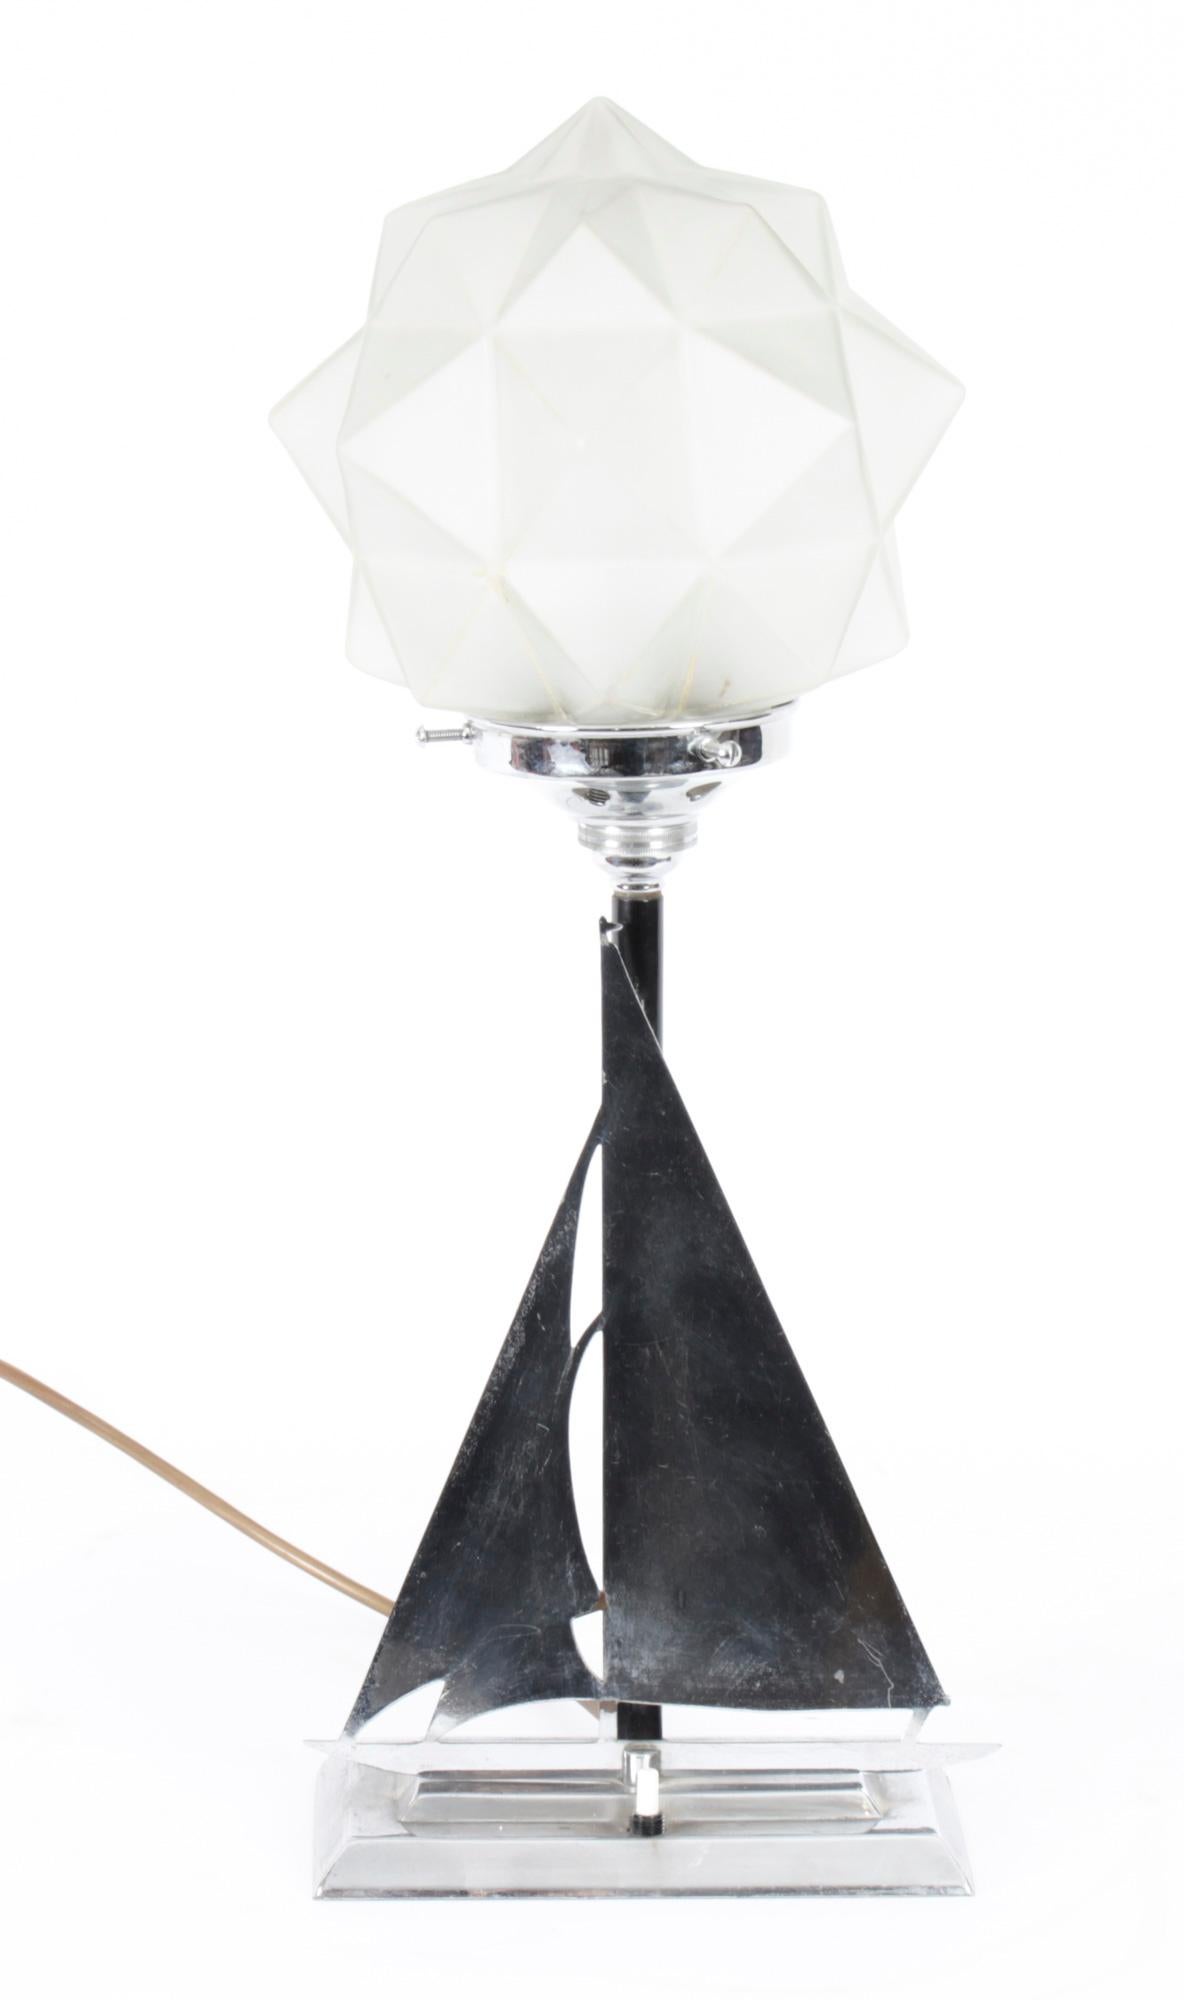 This is a beautiful antique Art Deco lamp depicting a chrome yacht with sail, circa 1920 in date.
 
This lamp has a stencilled cut chrome plated yacht design on a stepped rectangular base and features a multifaceted frosted glass globe shade.
